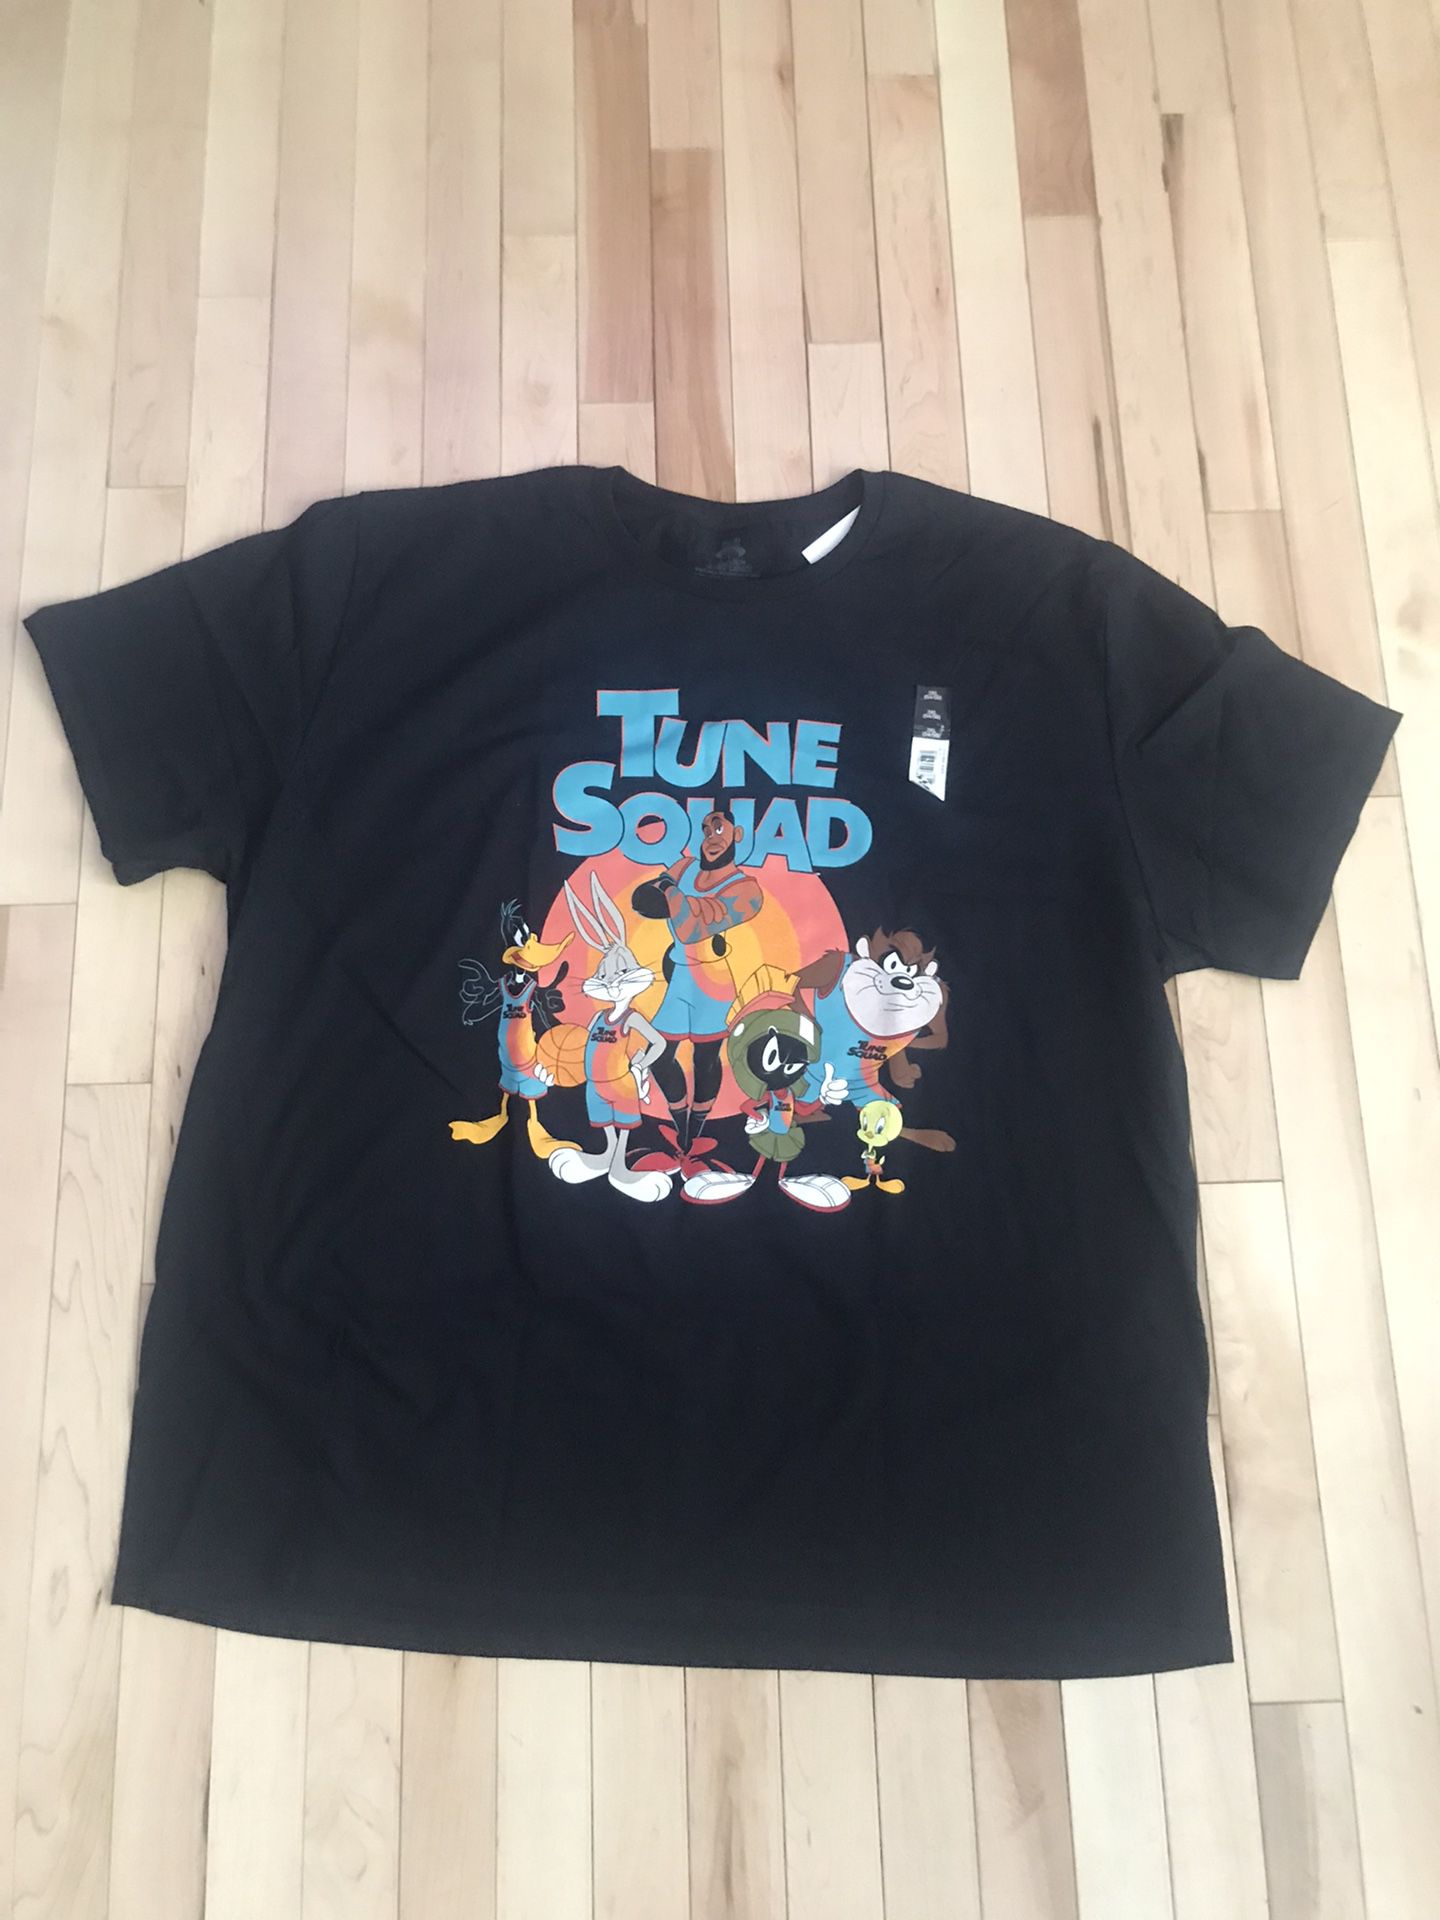 SPACE JAM TUNE SQUAD TEE SHIRT SIZE LARGE NEW 